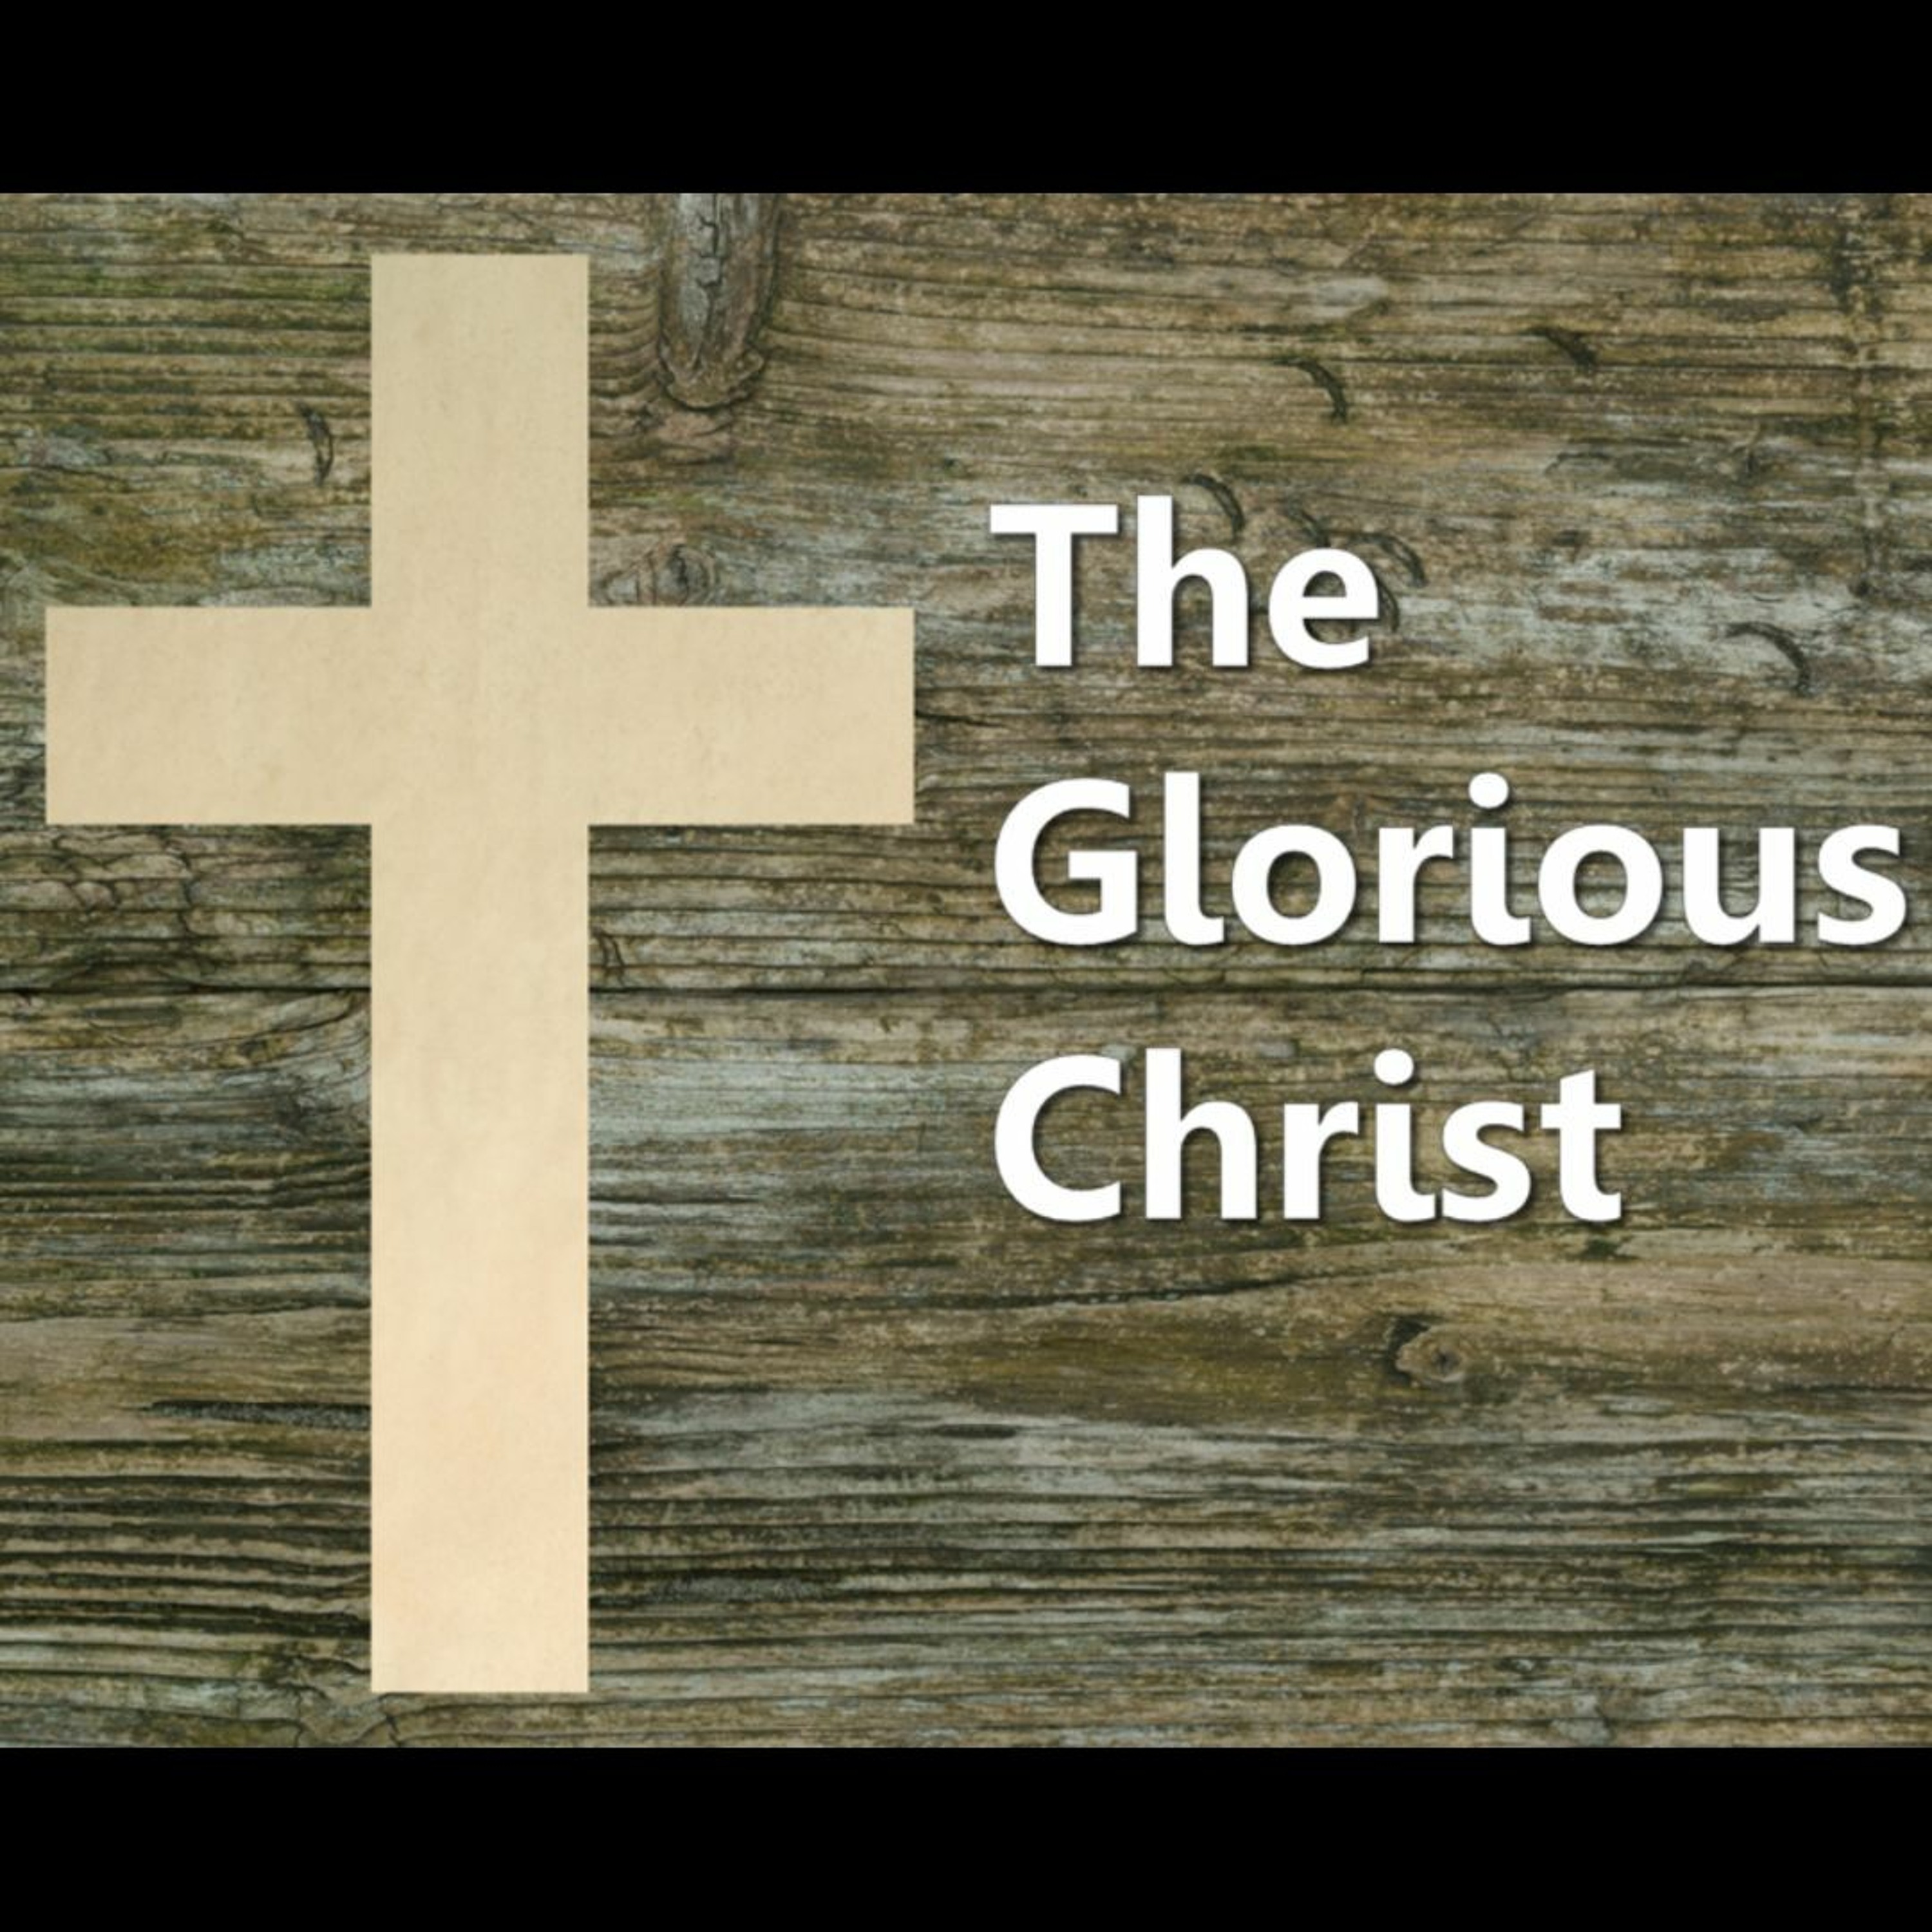 The Glorious Christ (Colossians 1:15-20)